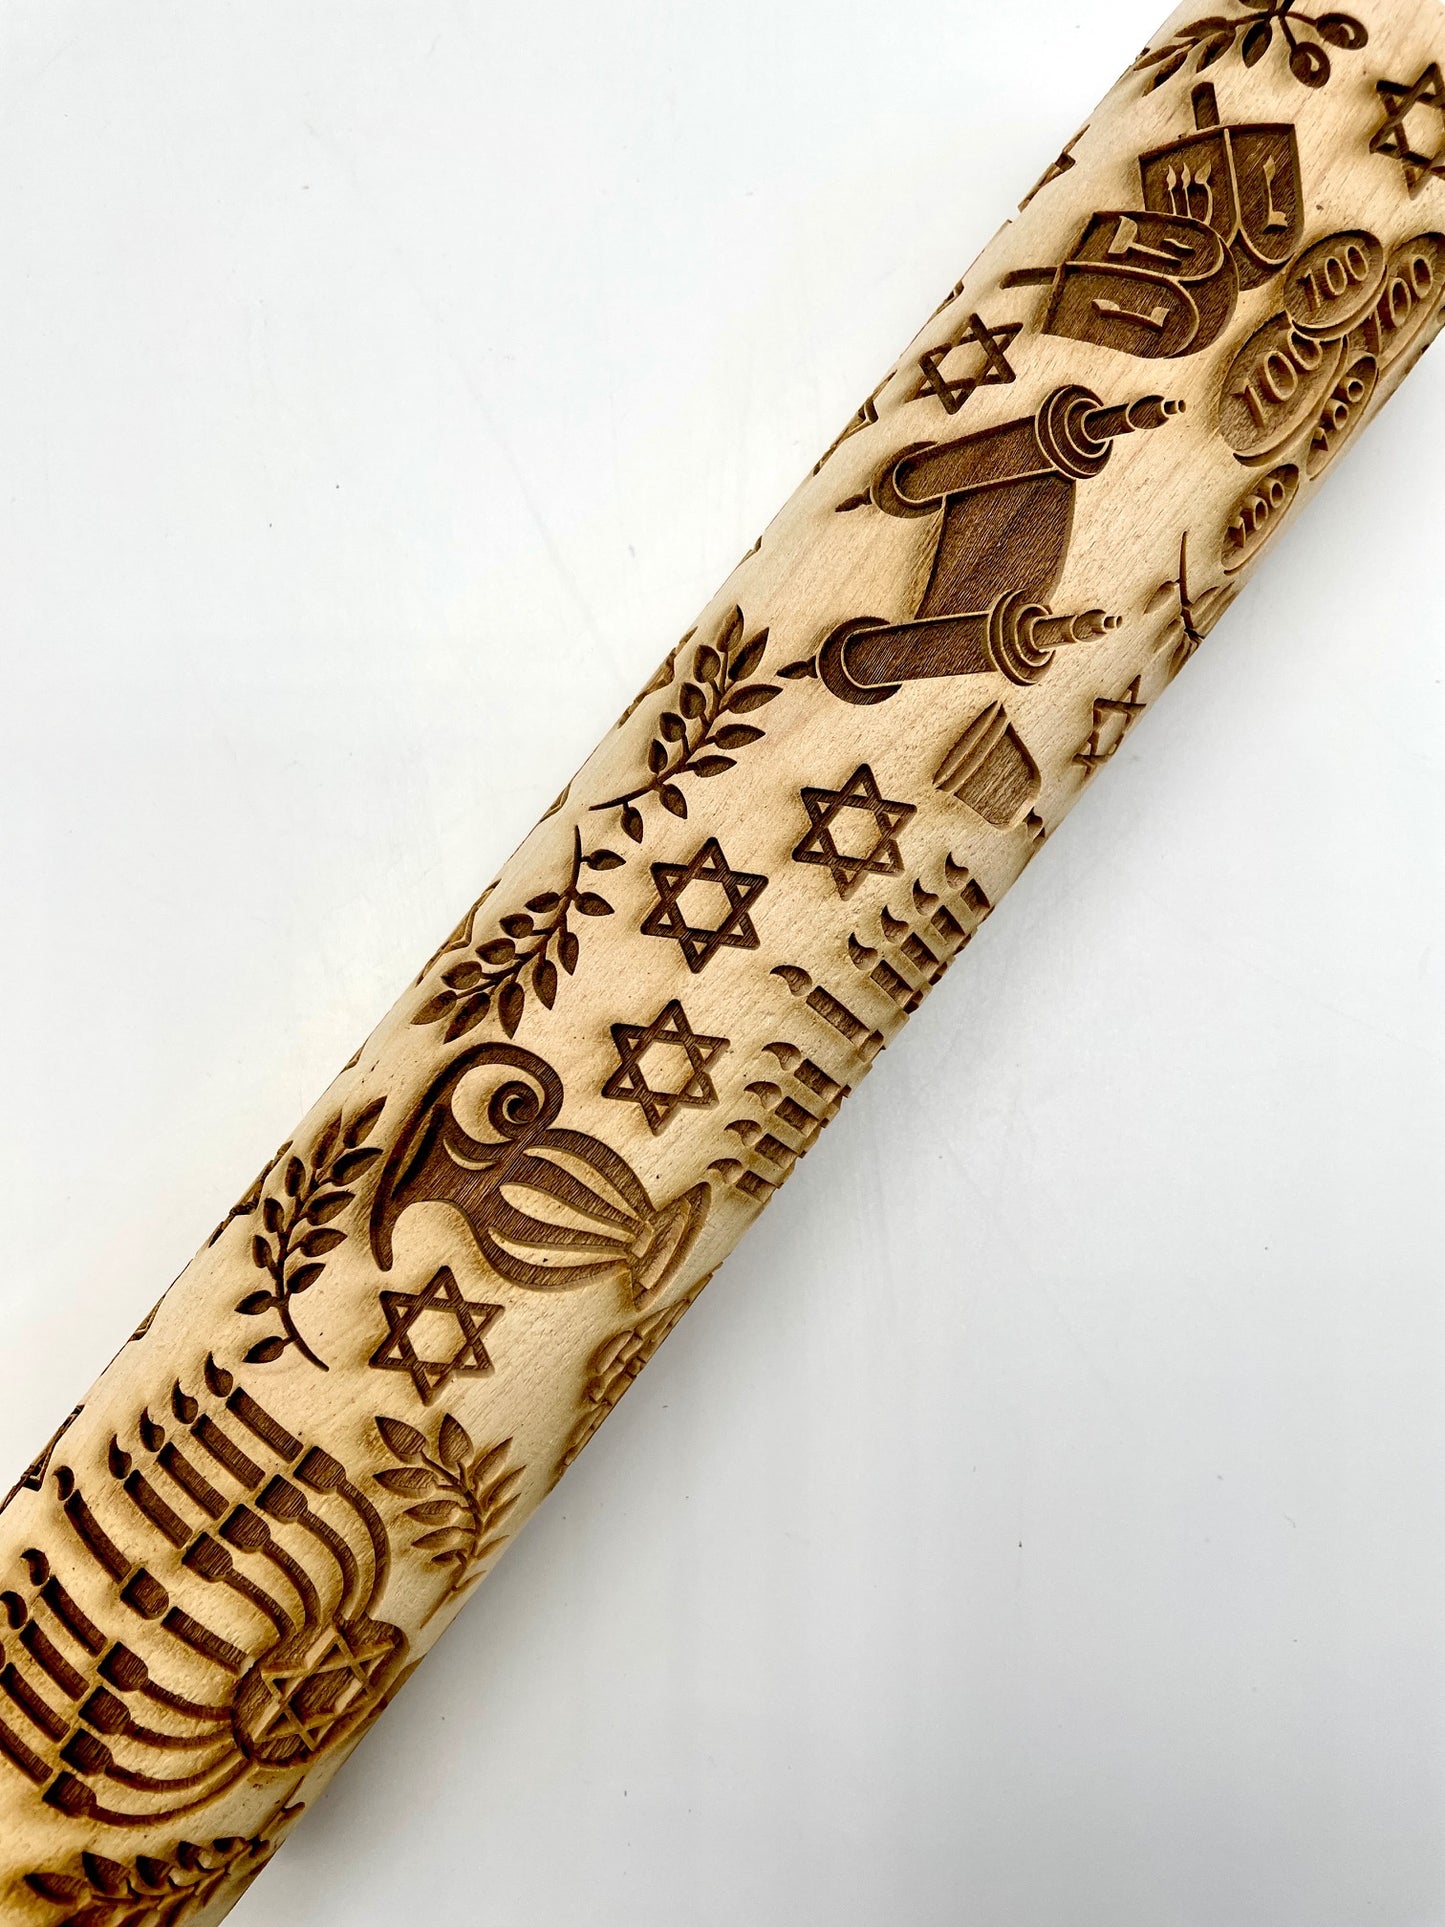 Hanukkah Textured Rolling Pin **NOTE - The engraving has been corrected so the numbers & Hebrew letters transfer to the clay in the correct orientation.  The photographs on this product have not been updated to reflect the correction***